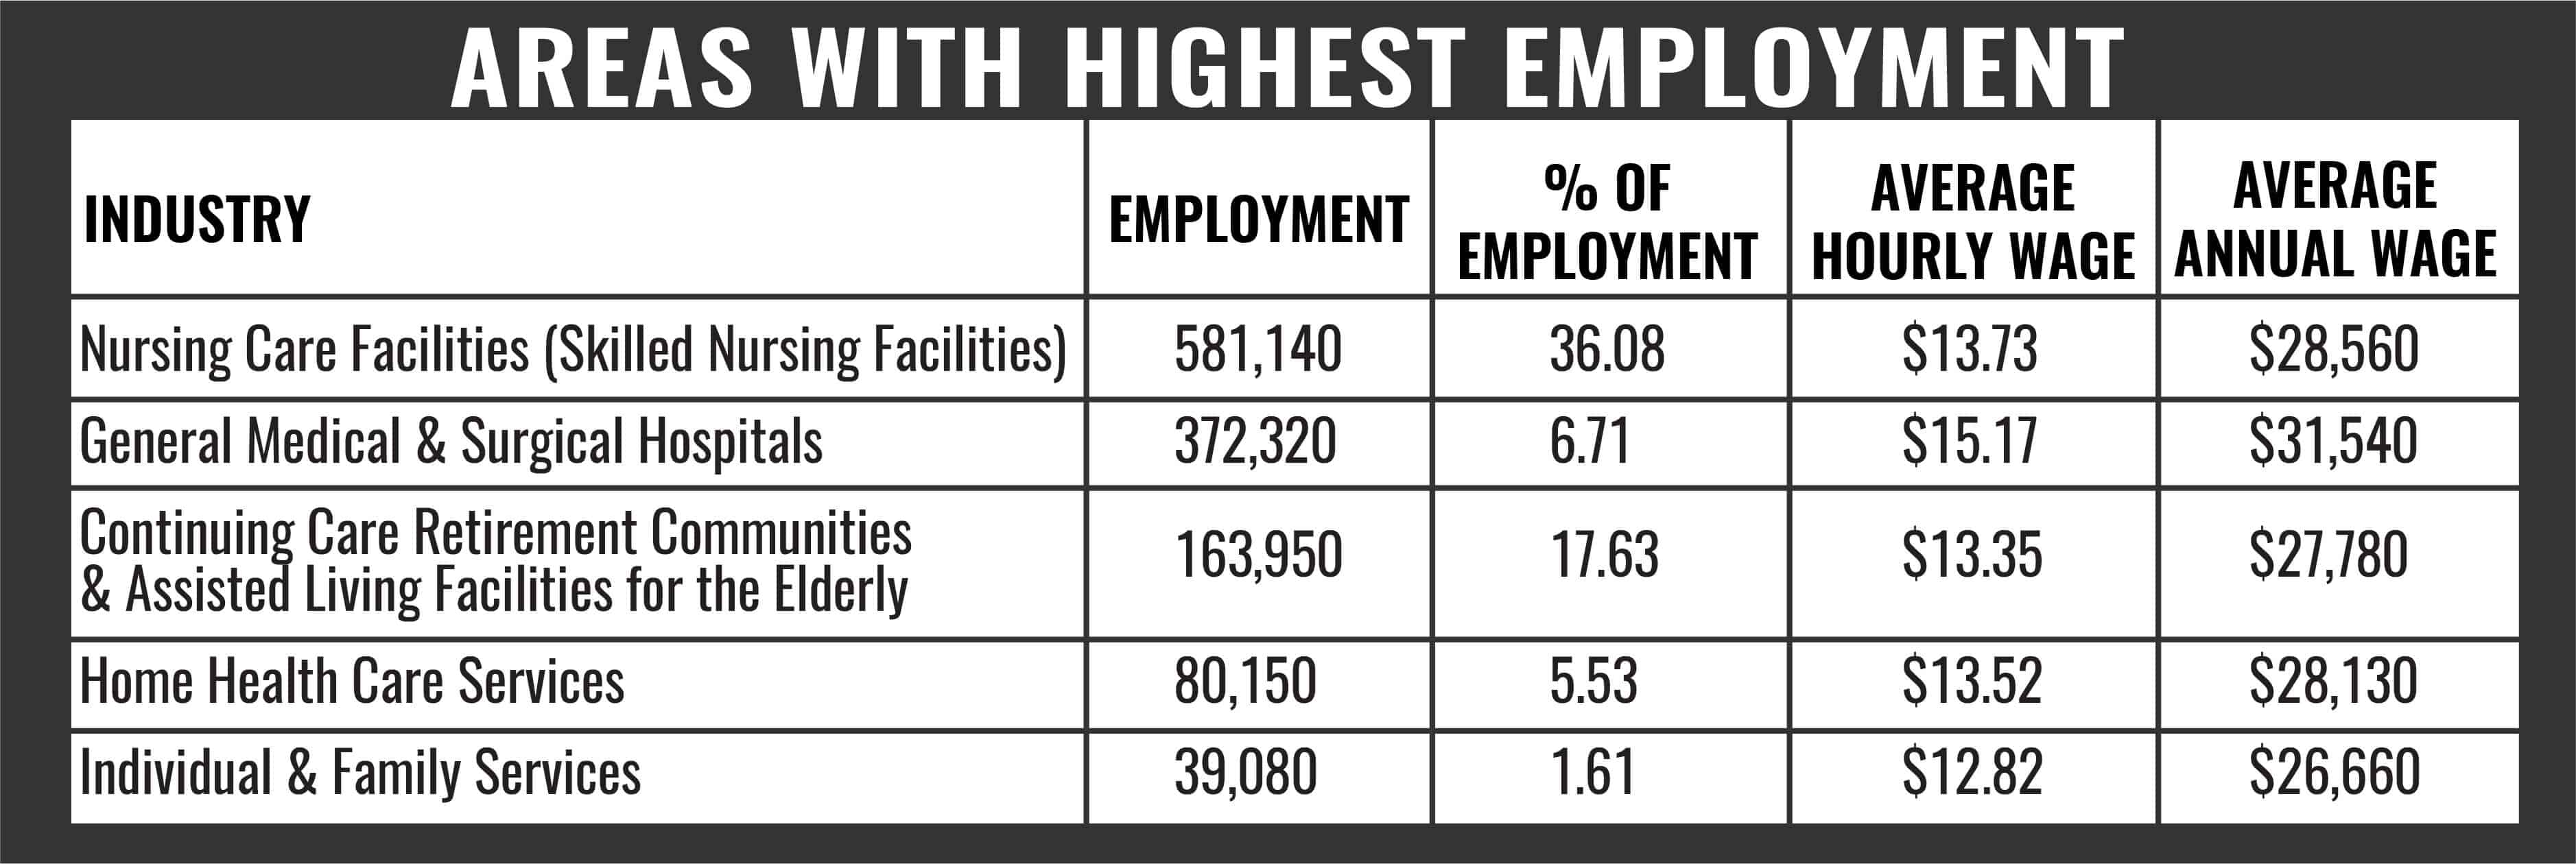 CNA Areas With Highest Employment